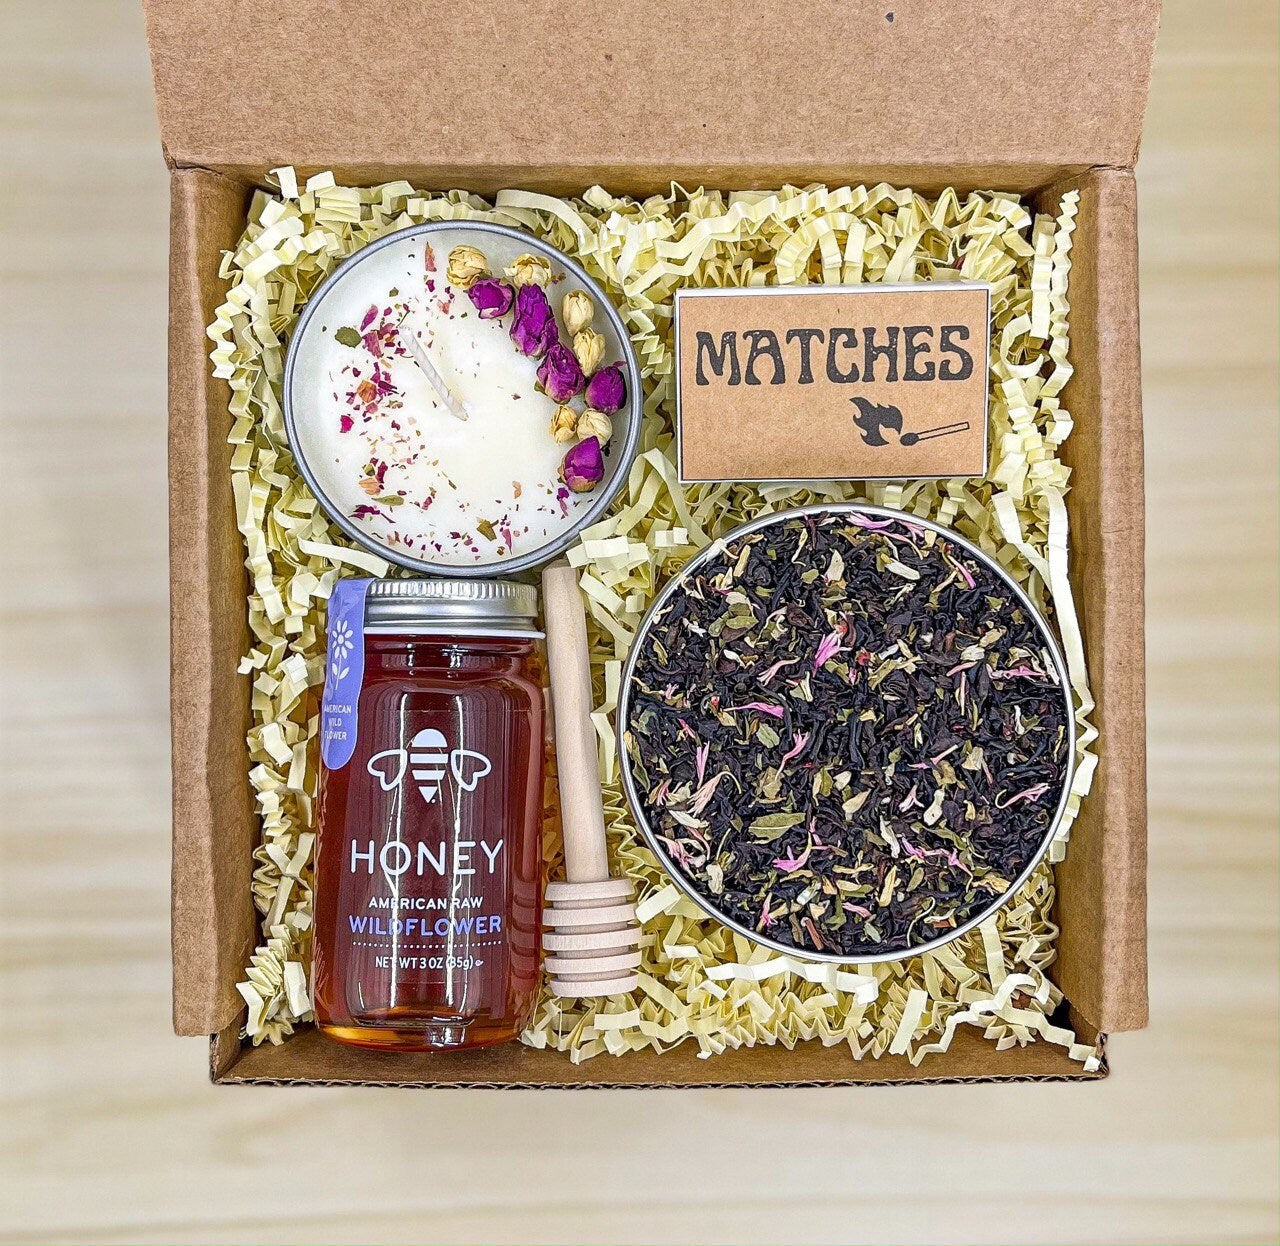 Sympathy + Thinking of You Gift Boxes - Lavender and Pine Gifting